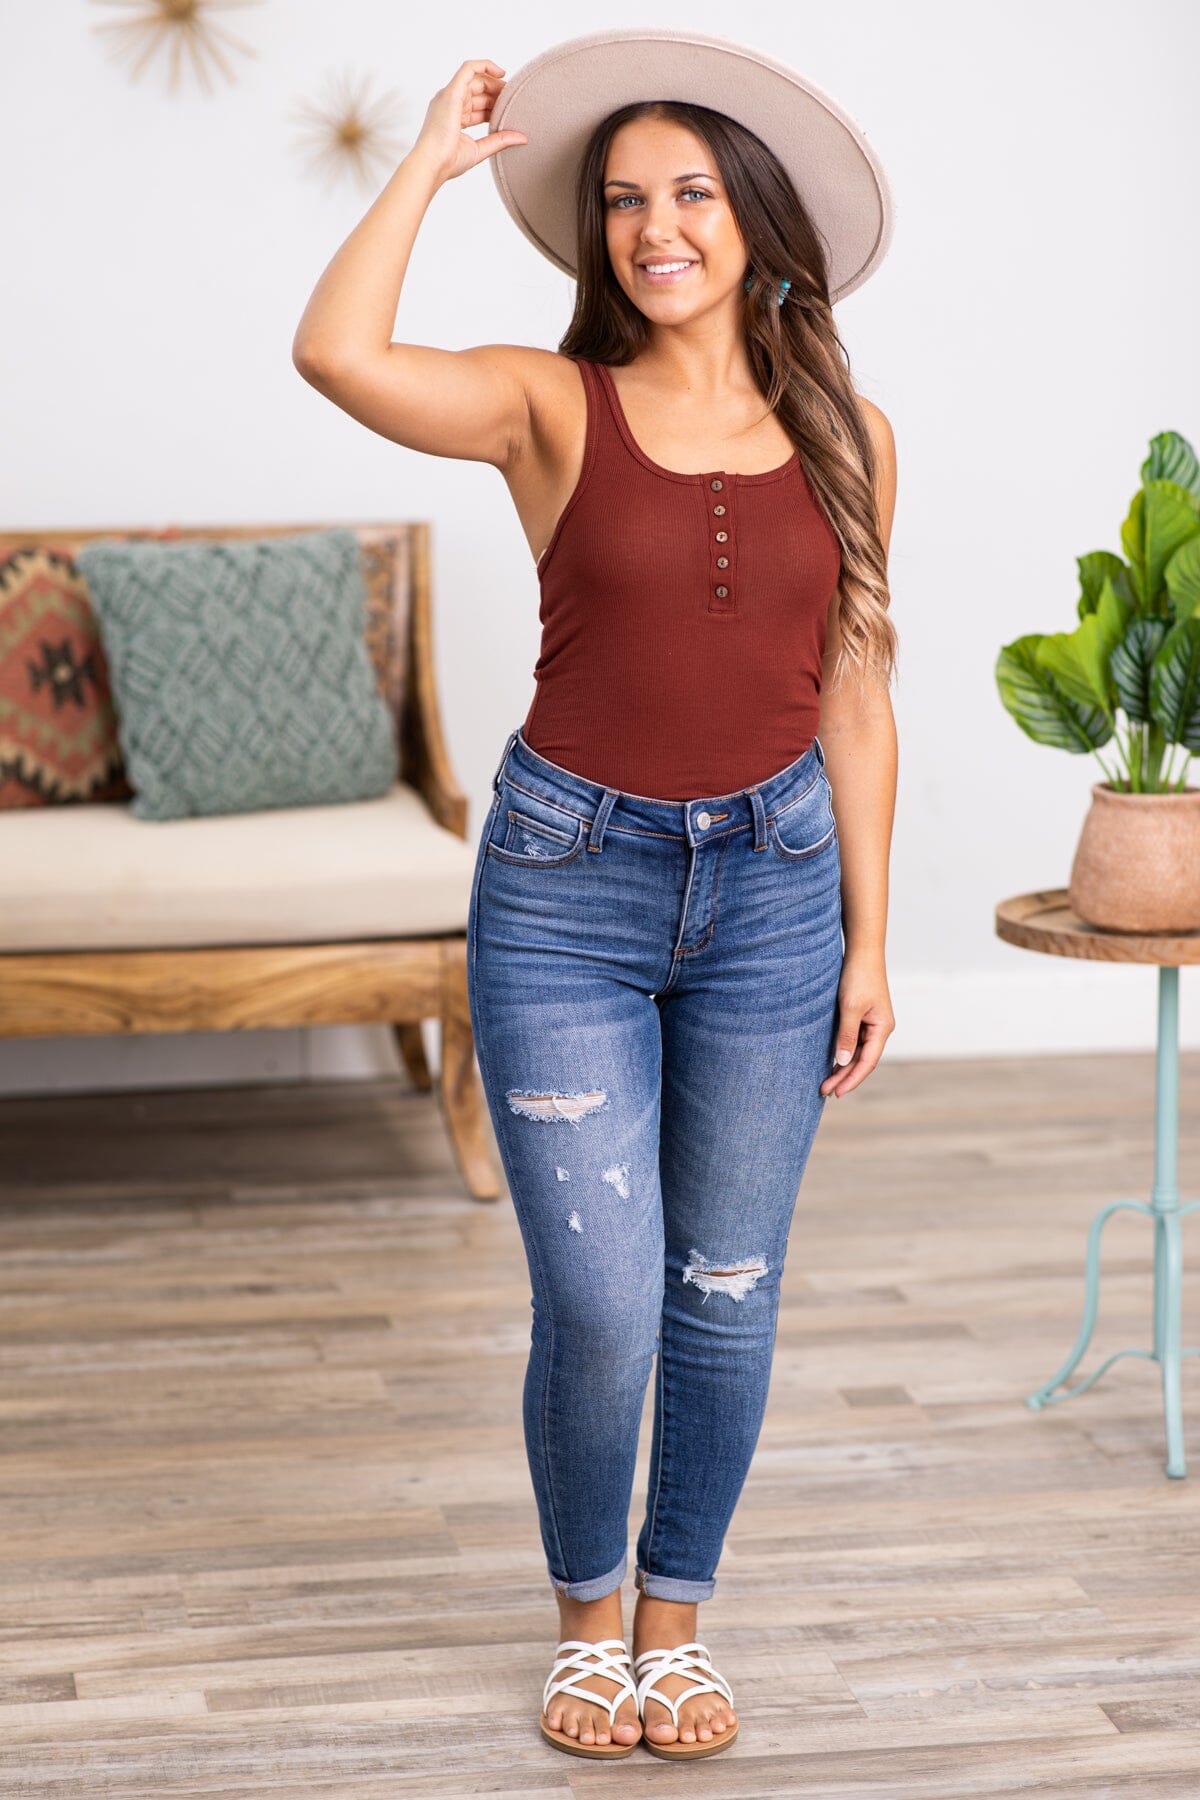 Maroon Henley Tank - Filly Flair